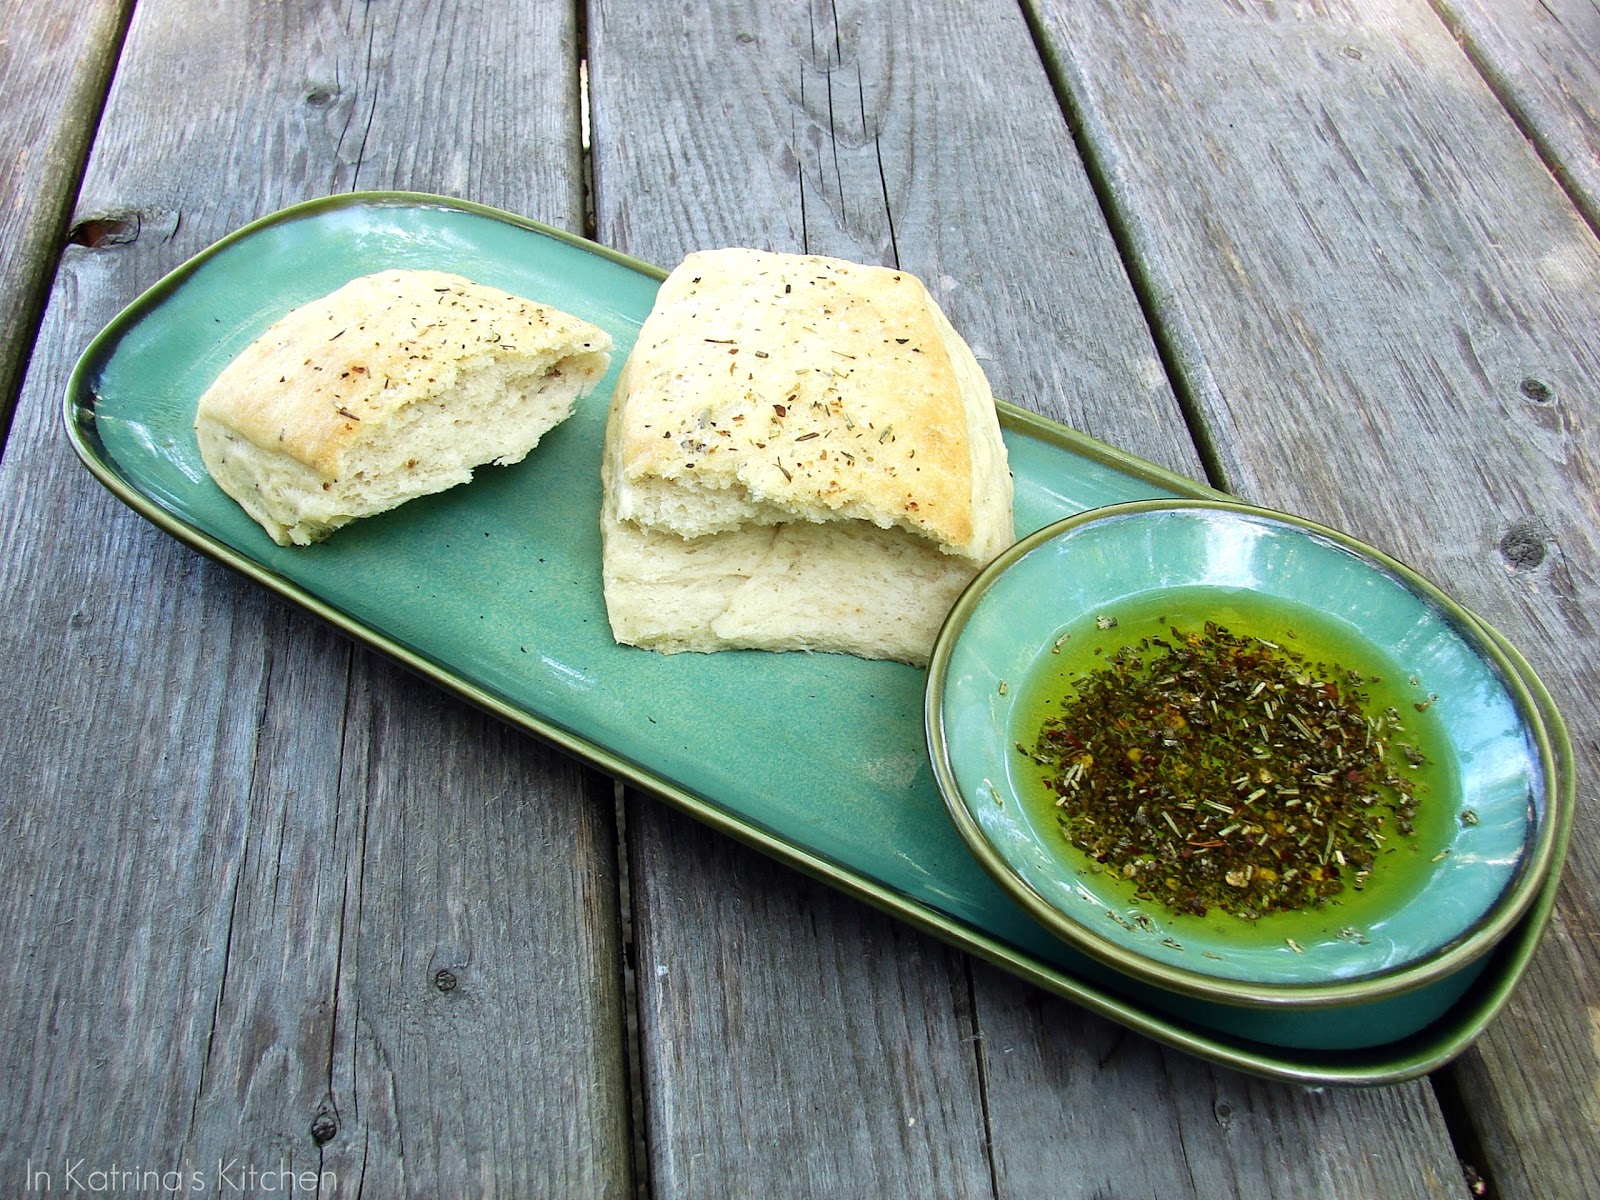 Olive Oil Bread Dipping Spice Recipe - The Budget Diet